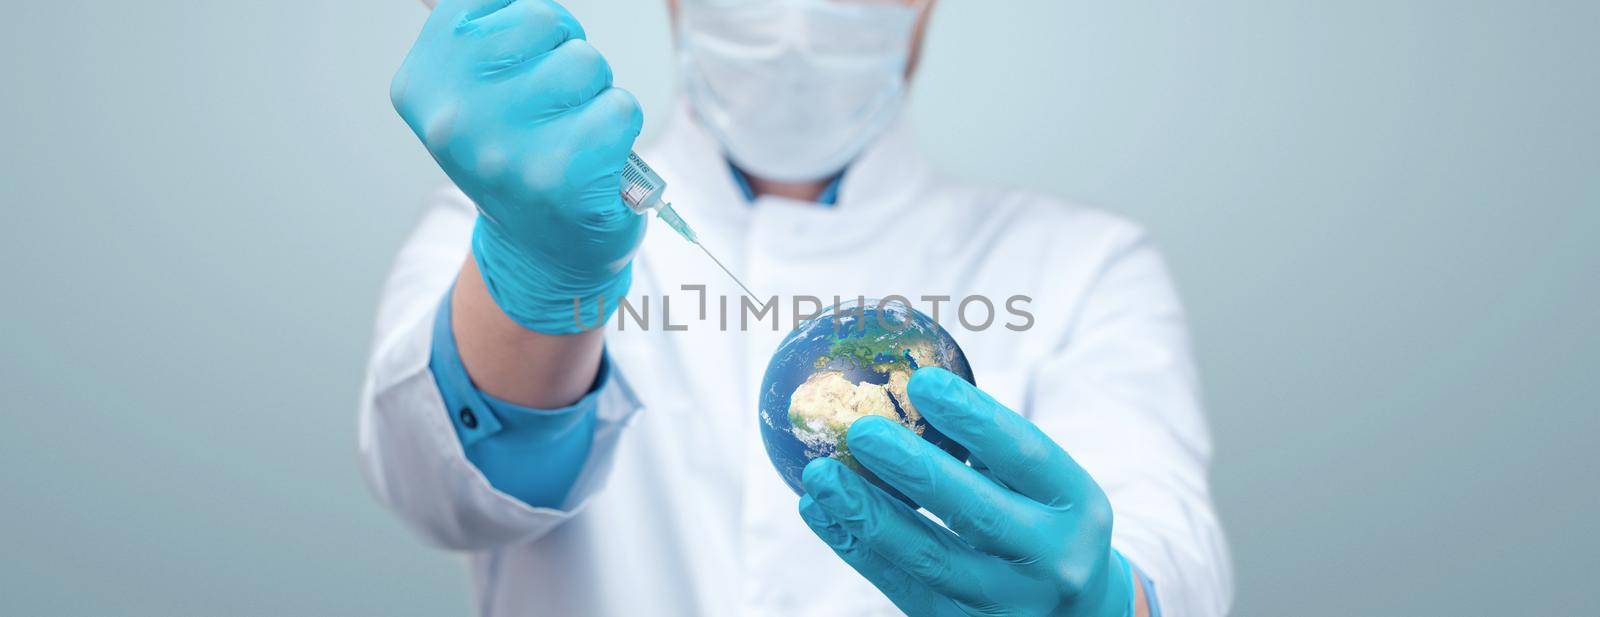 Doctor hold a earth globe in hands and a medical syringe with vaccine against corona virus. 3D rendering. Elements of this image furnished by NASA. by Taut